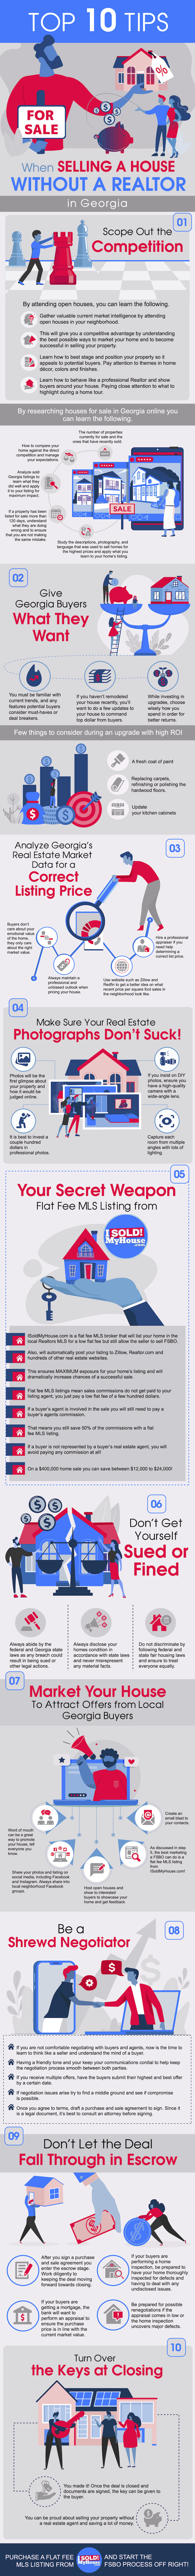 infographic of the 10 steps to sell a house in georgia without an agent